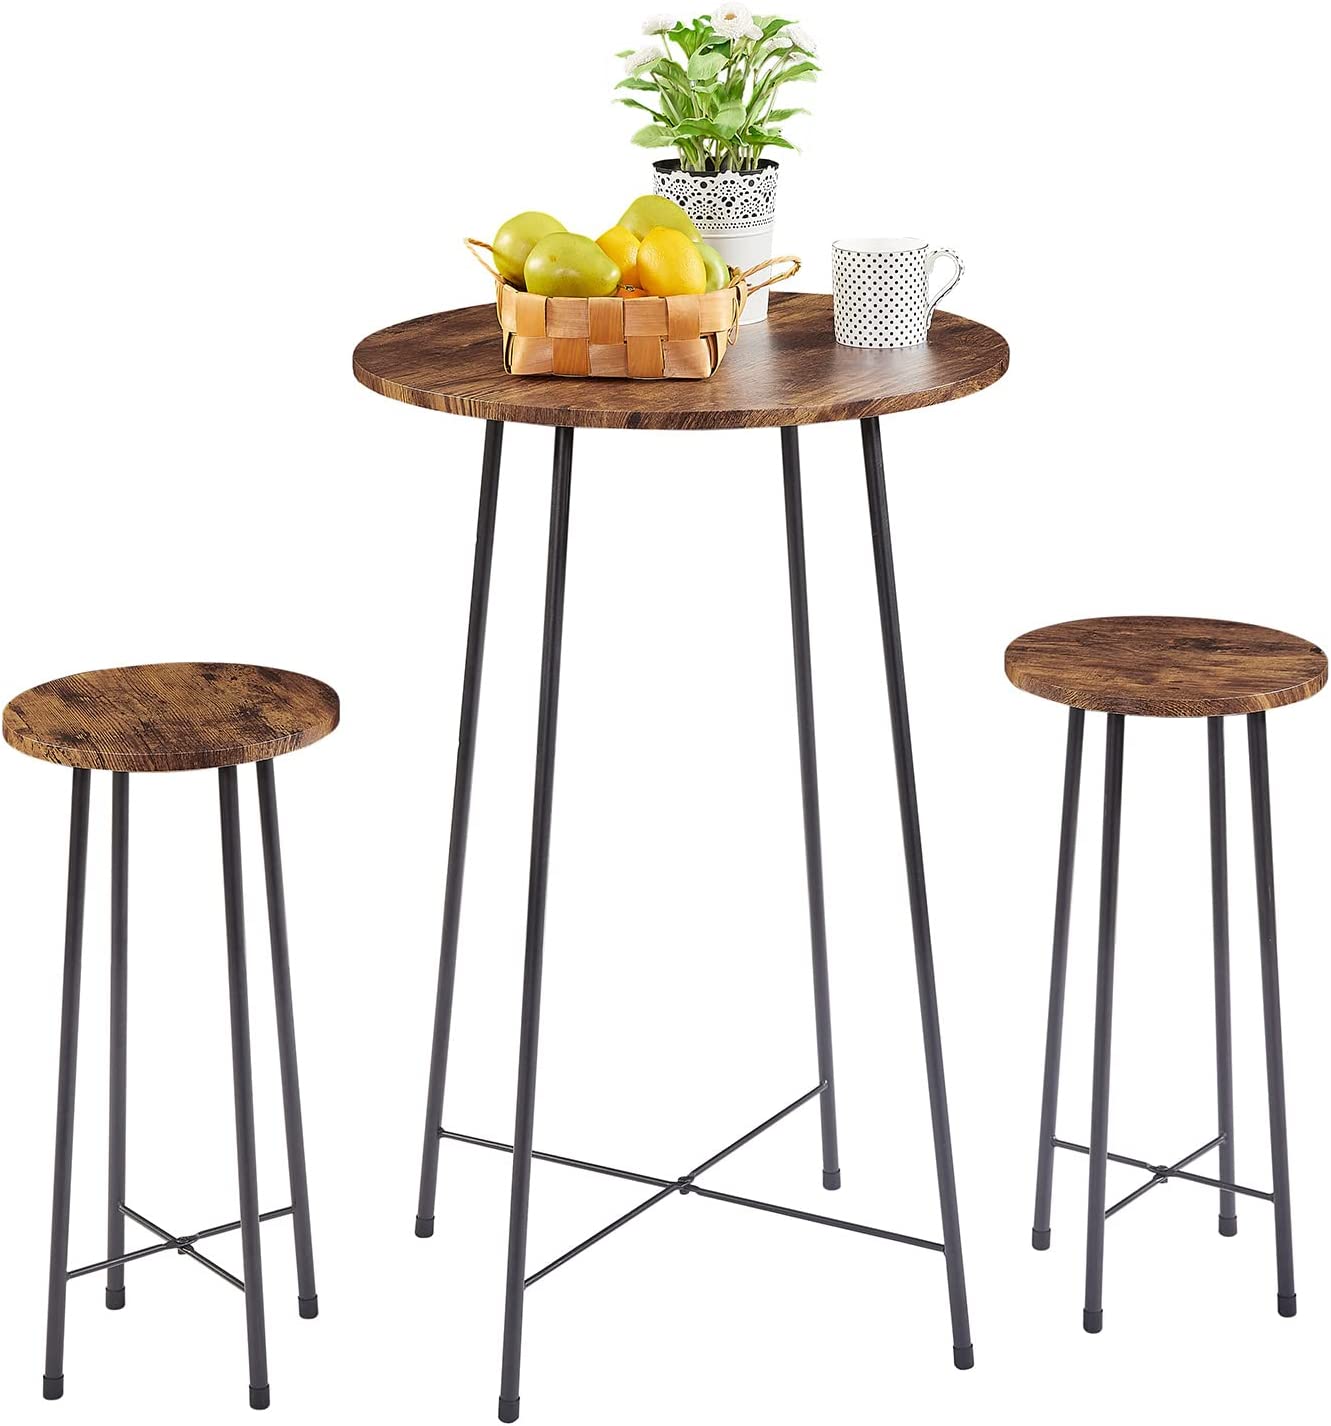 VECELO 3-Piece Round Pub Table Set with Counter Height & Wood top